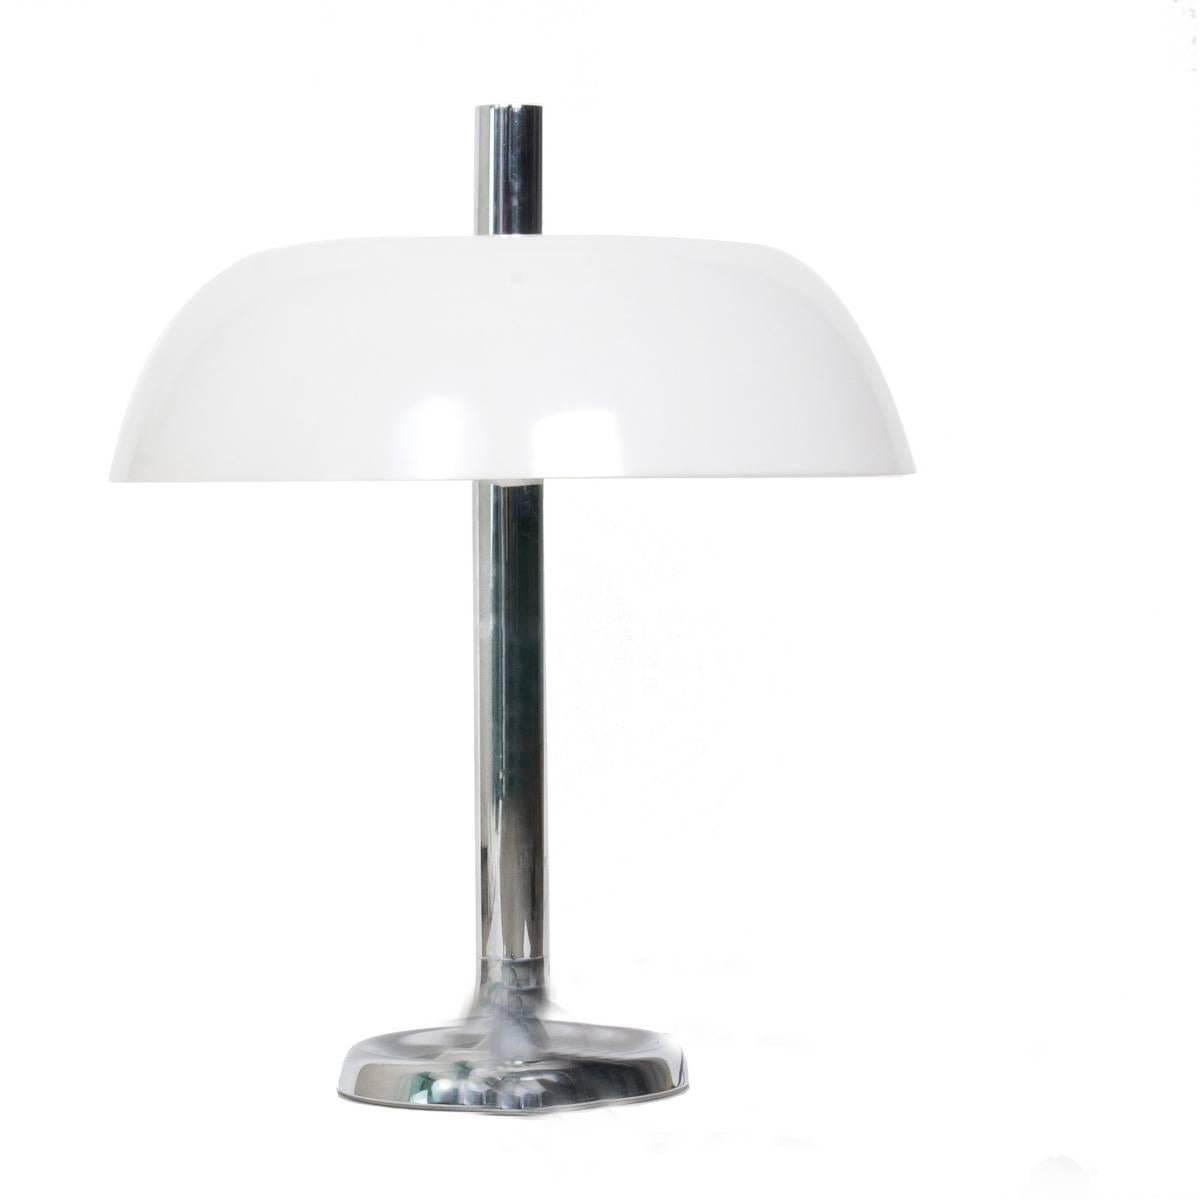 Pair of large table lamps with three E27 bulbs by Hillebrand, Germany with a chrome base and a white plastic molded shade. With on/off switch.

The stylish elegance of this lamp suits many environment, from midcentury to Danish modern and Space